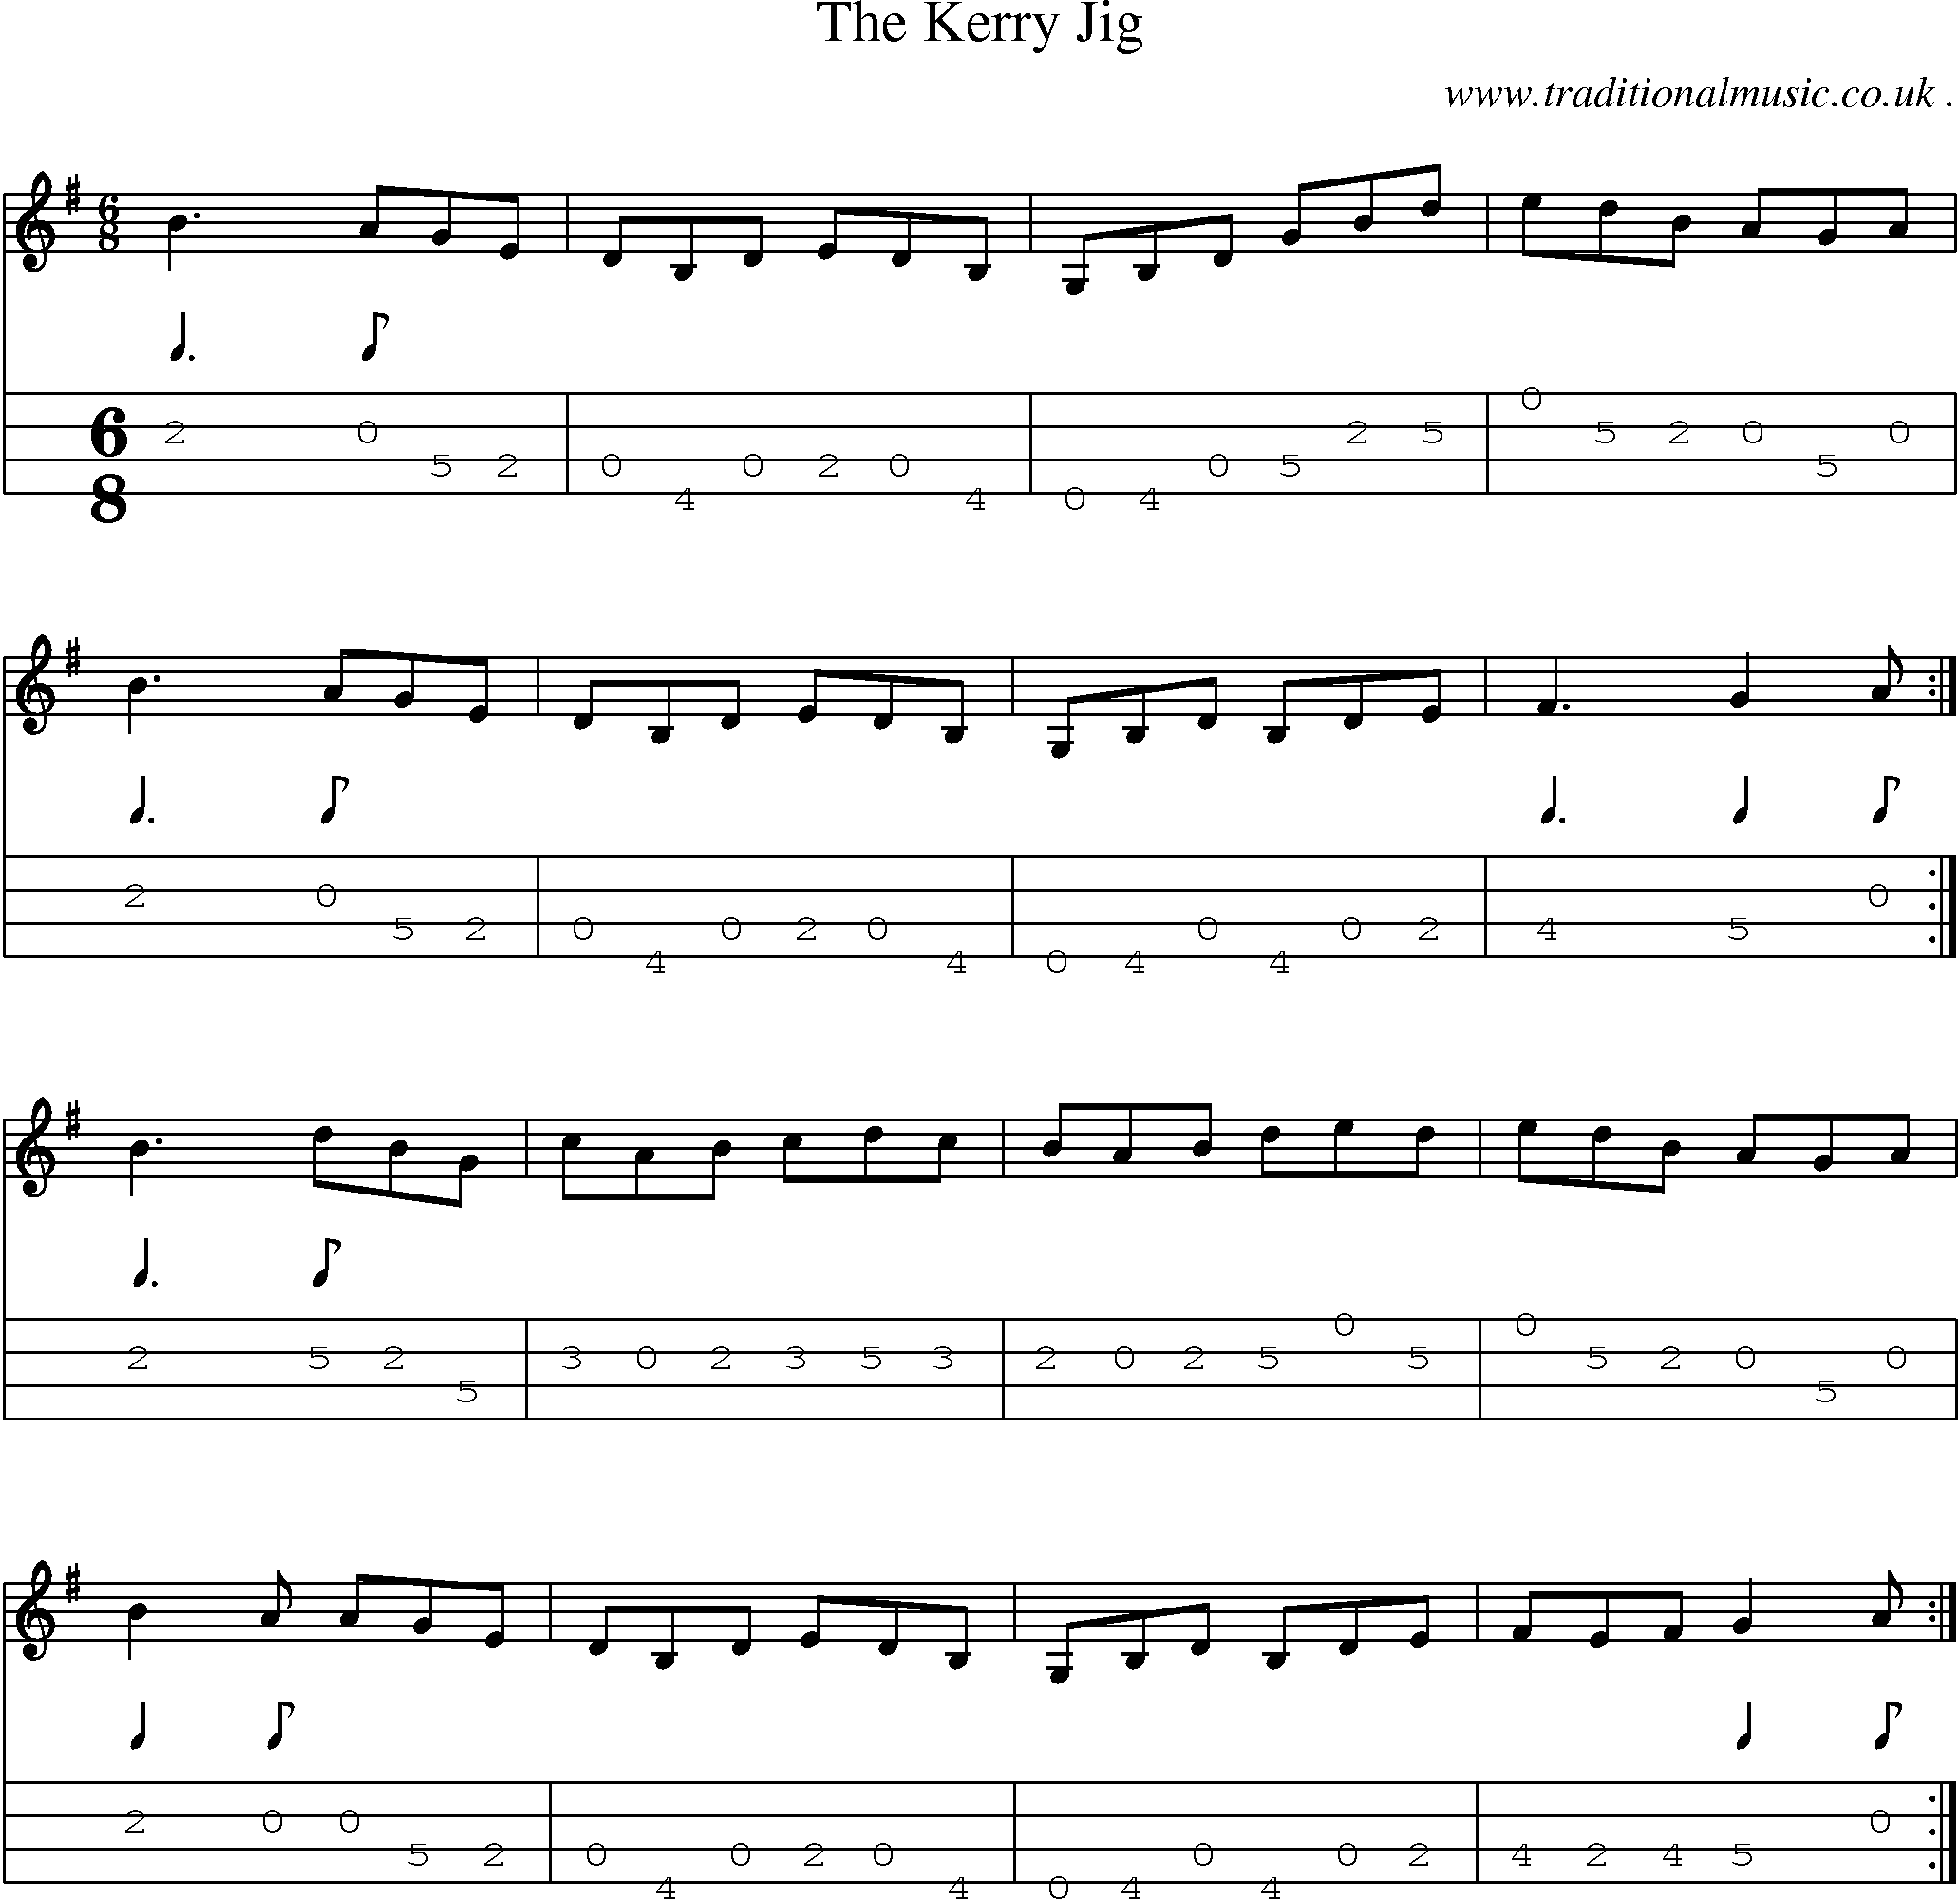 Sheet-Music and Mandolin Tabs for The Kerry Jig